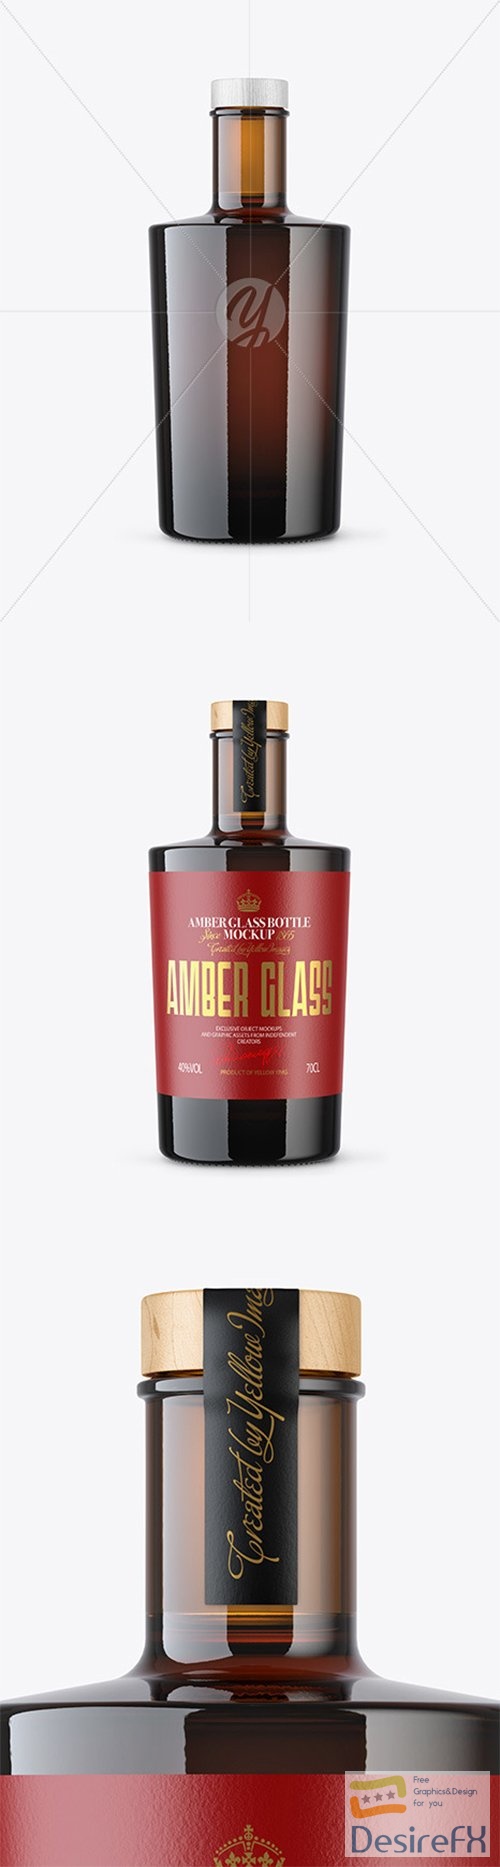 Amber Glass Bottle with Wooden Cap Mockup 80359 TIF